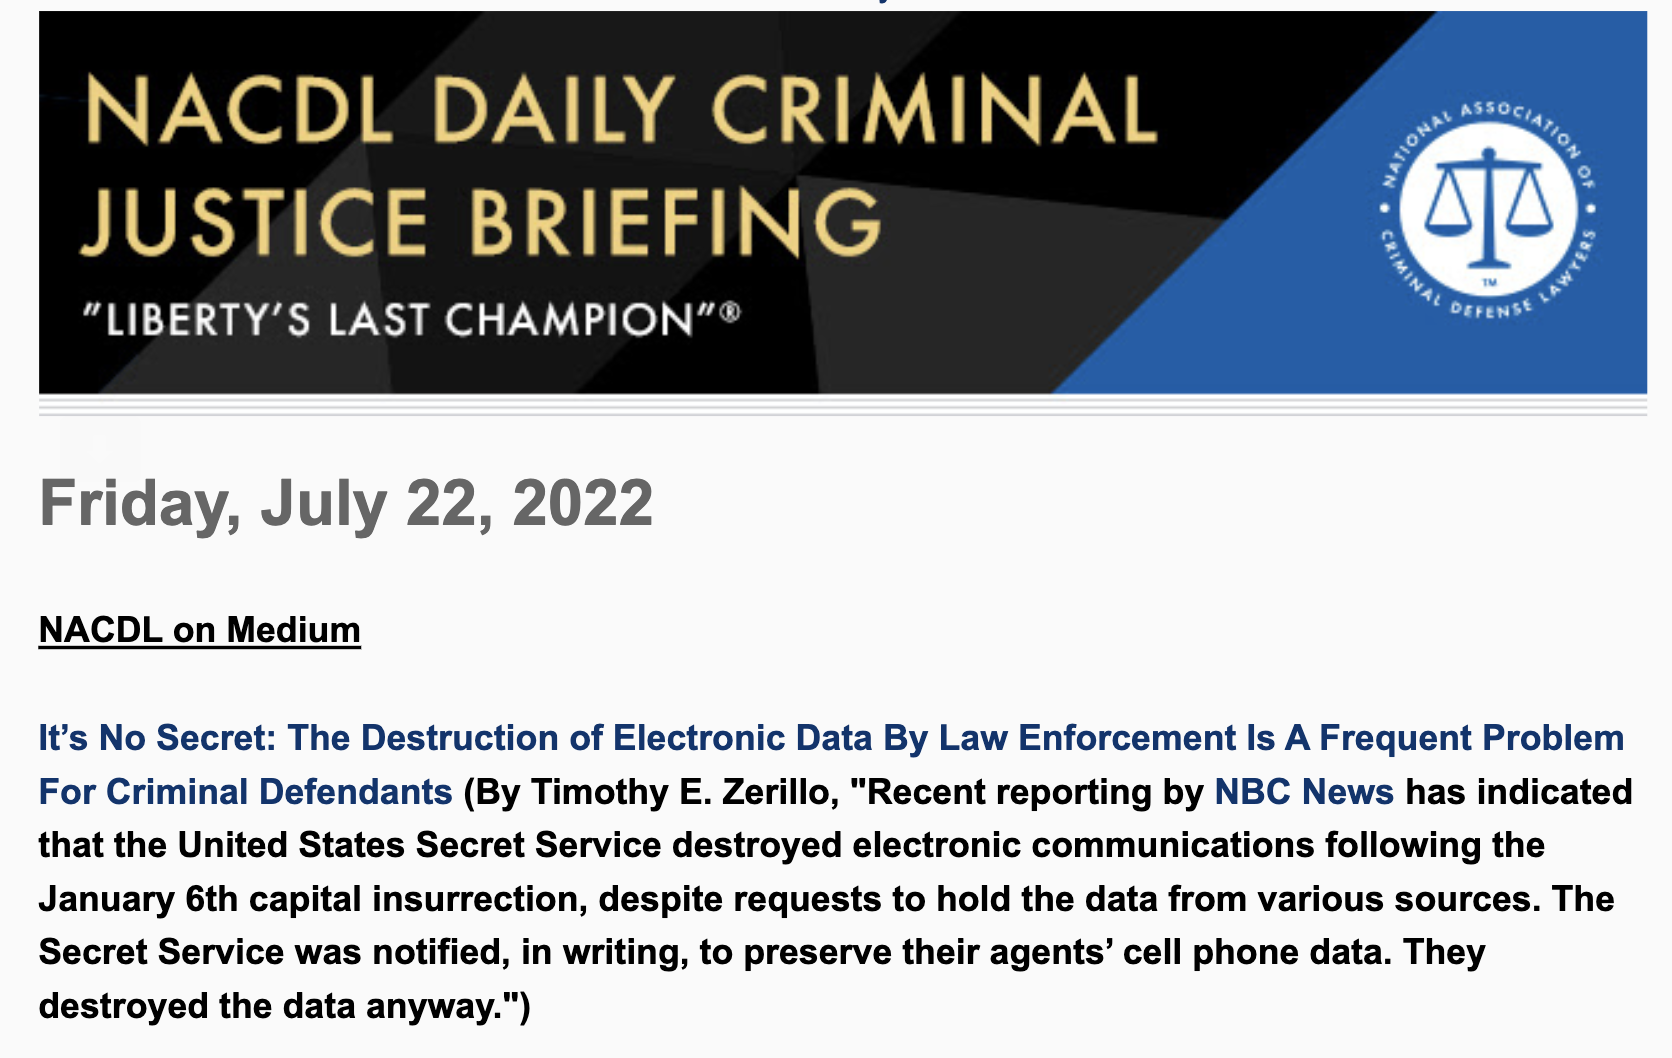 TIm Zerillo on Daily Justice Briefing for NACDL